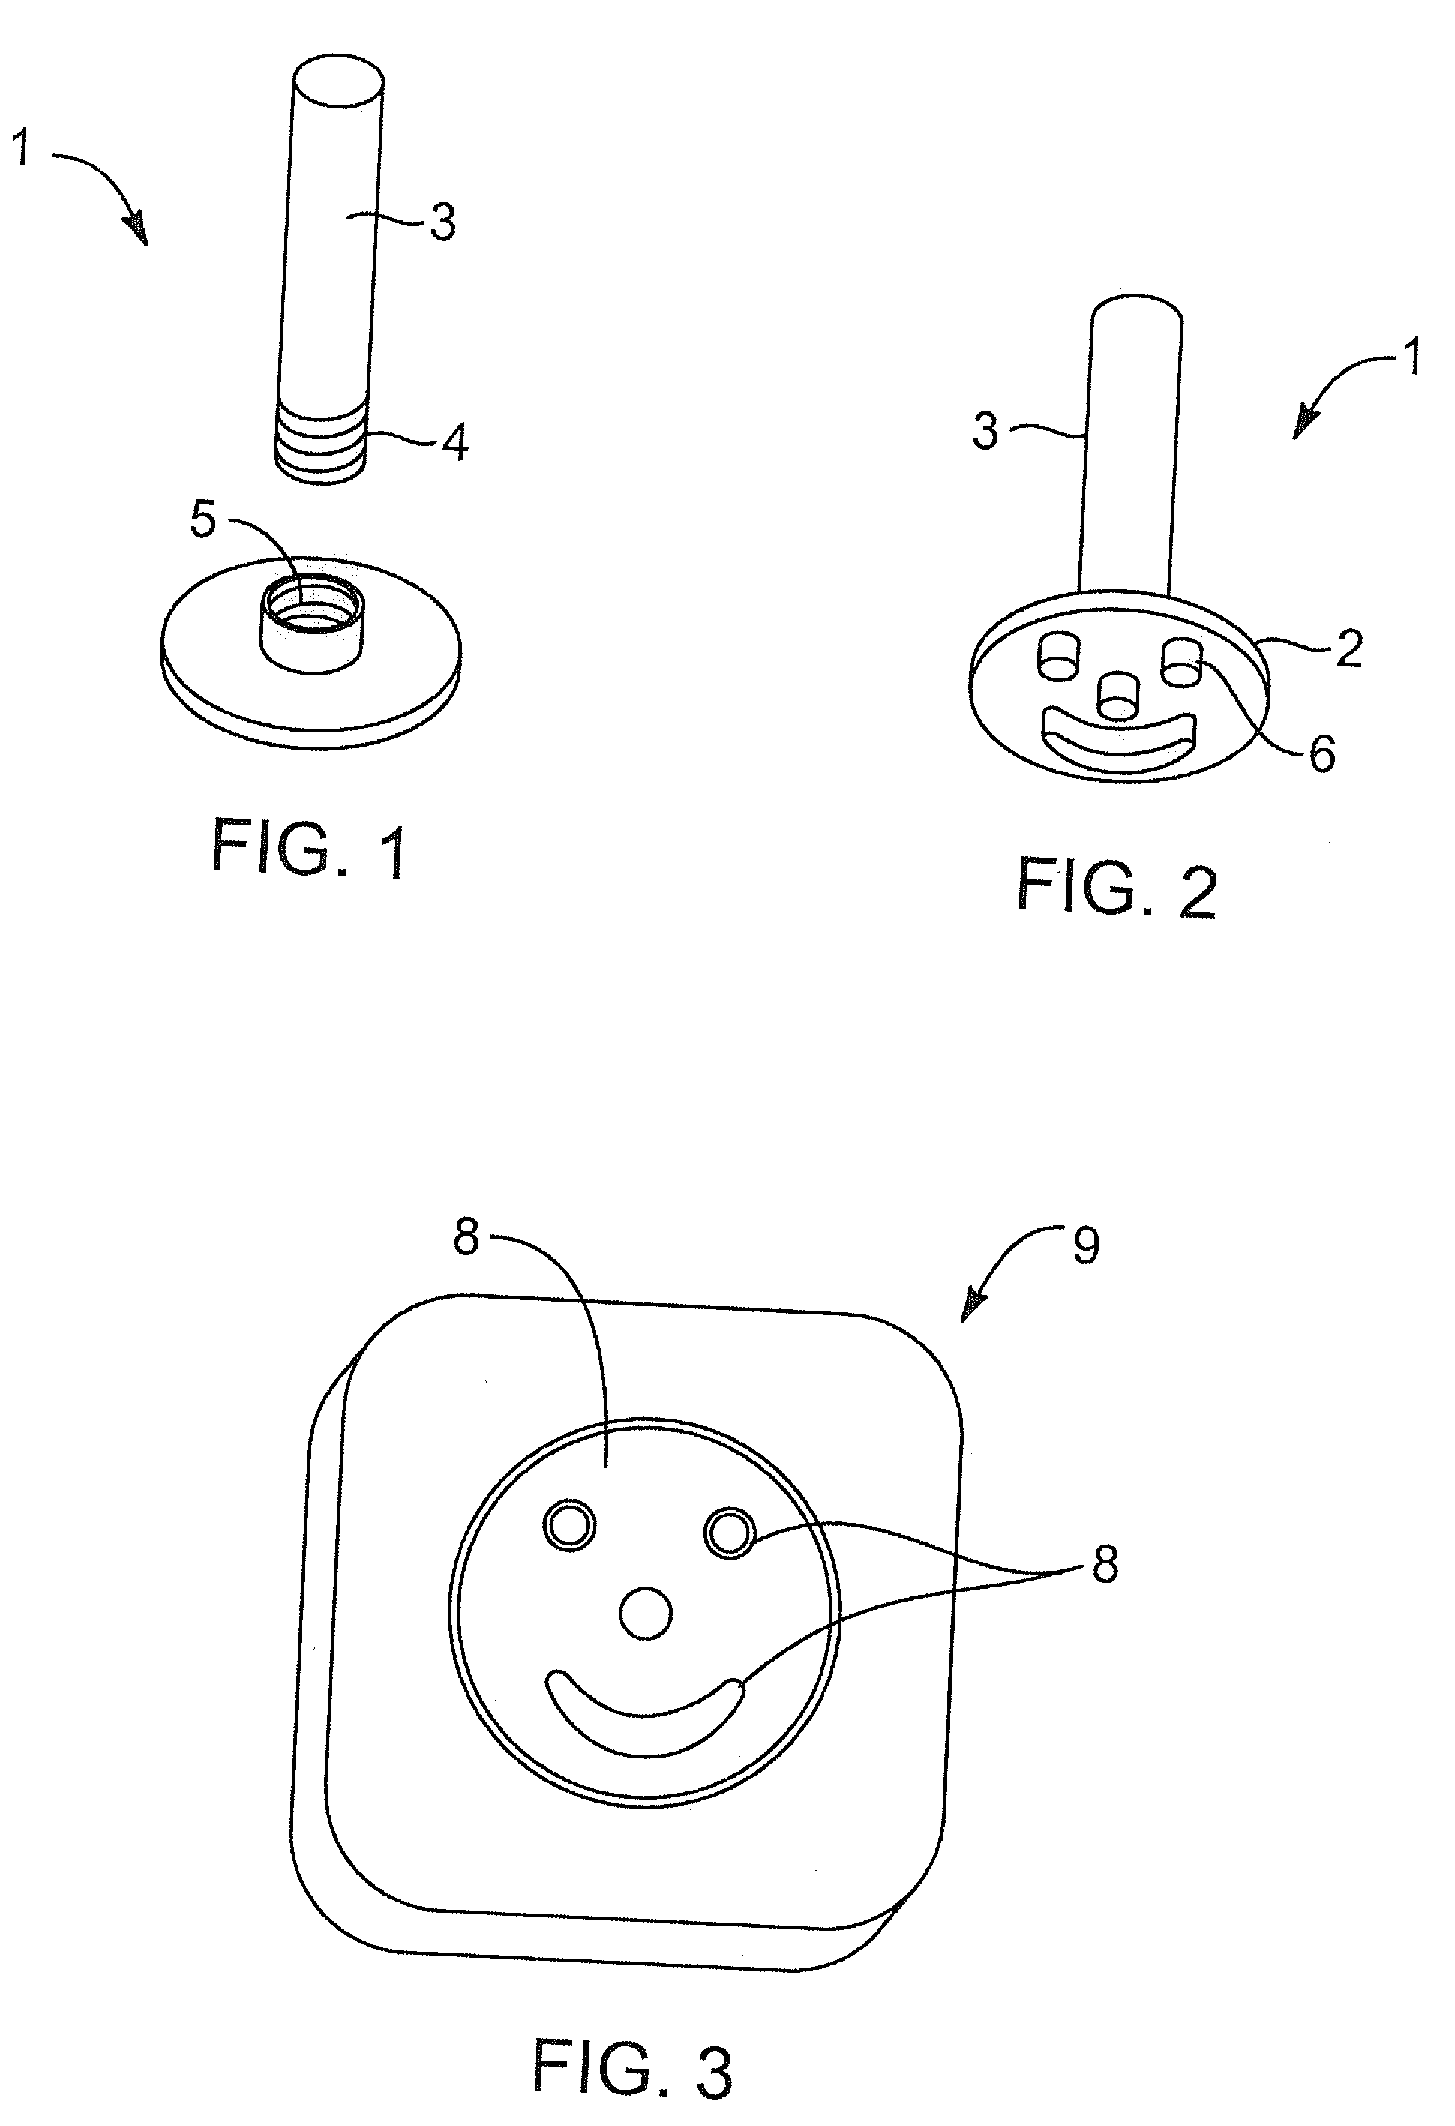 Apparatus, system, and method for a bread cutter and impression devices